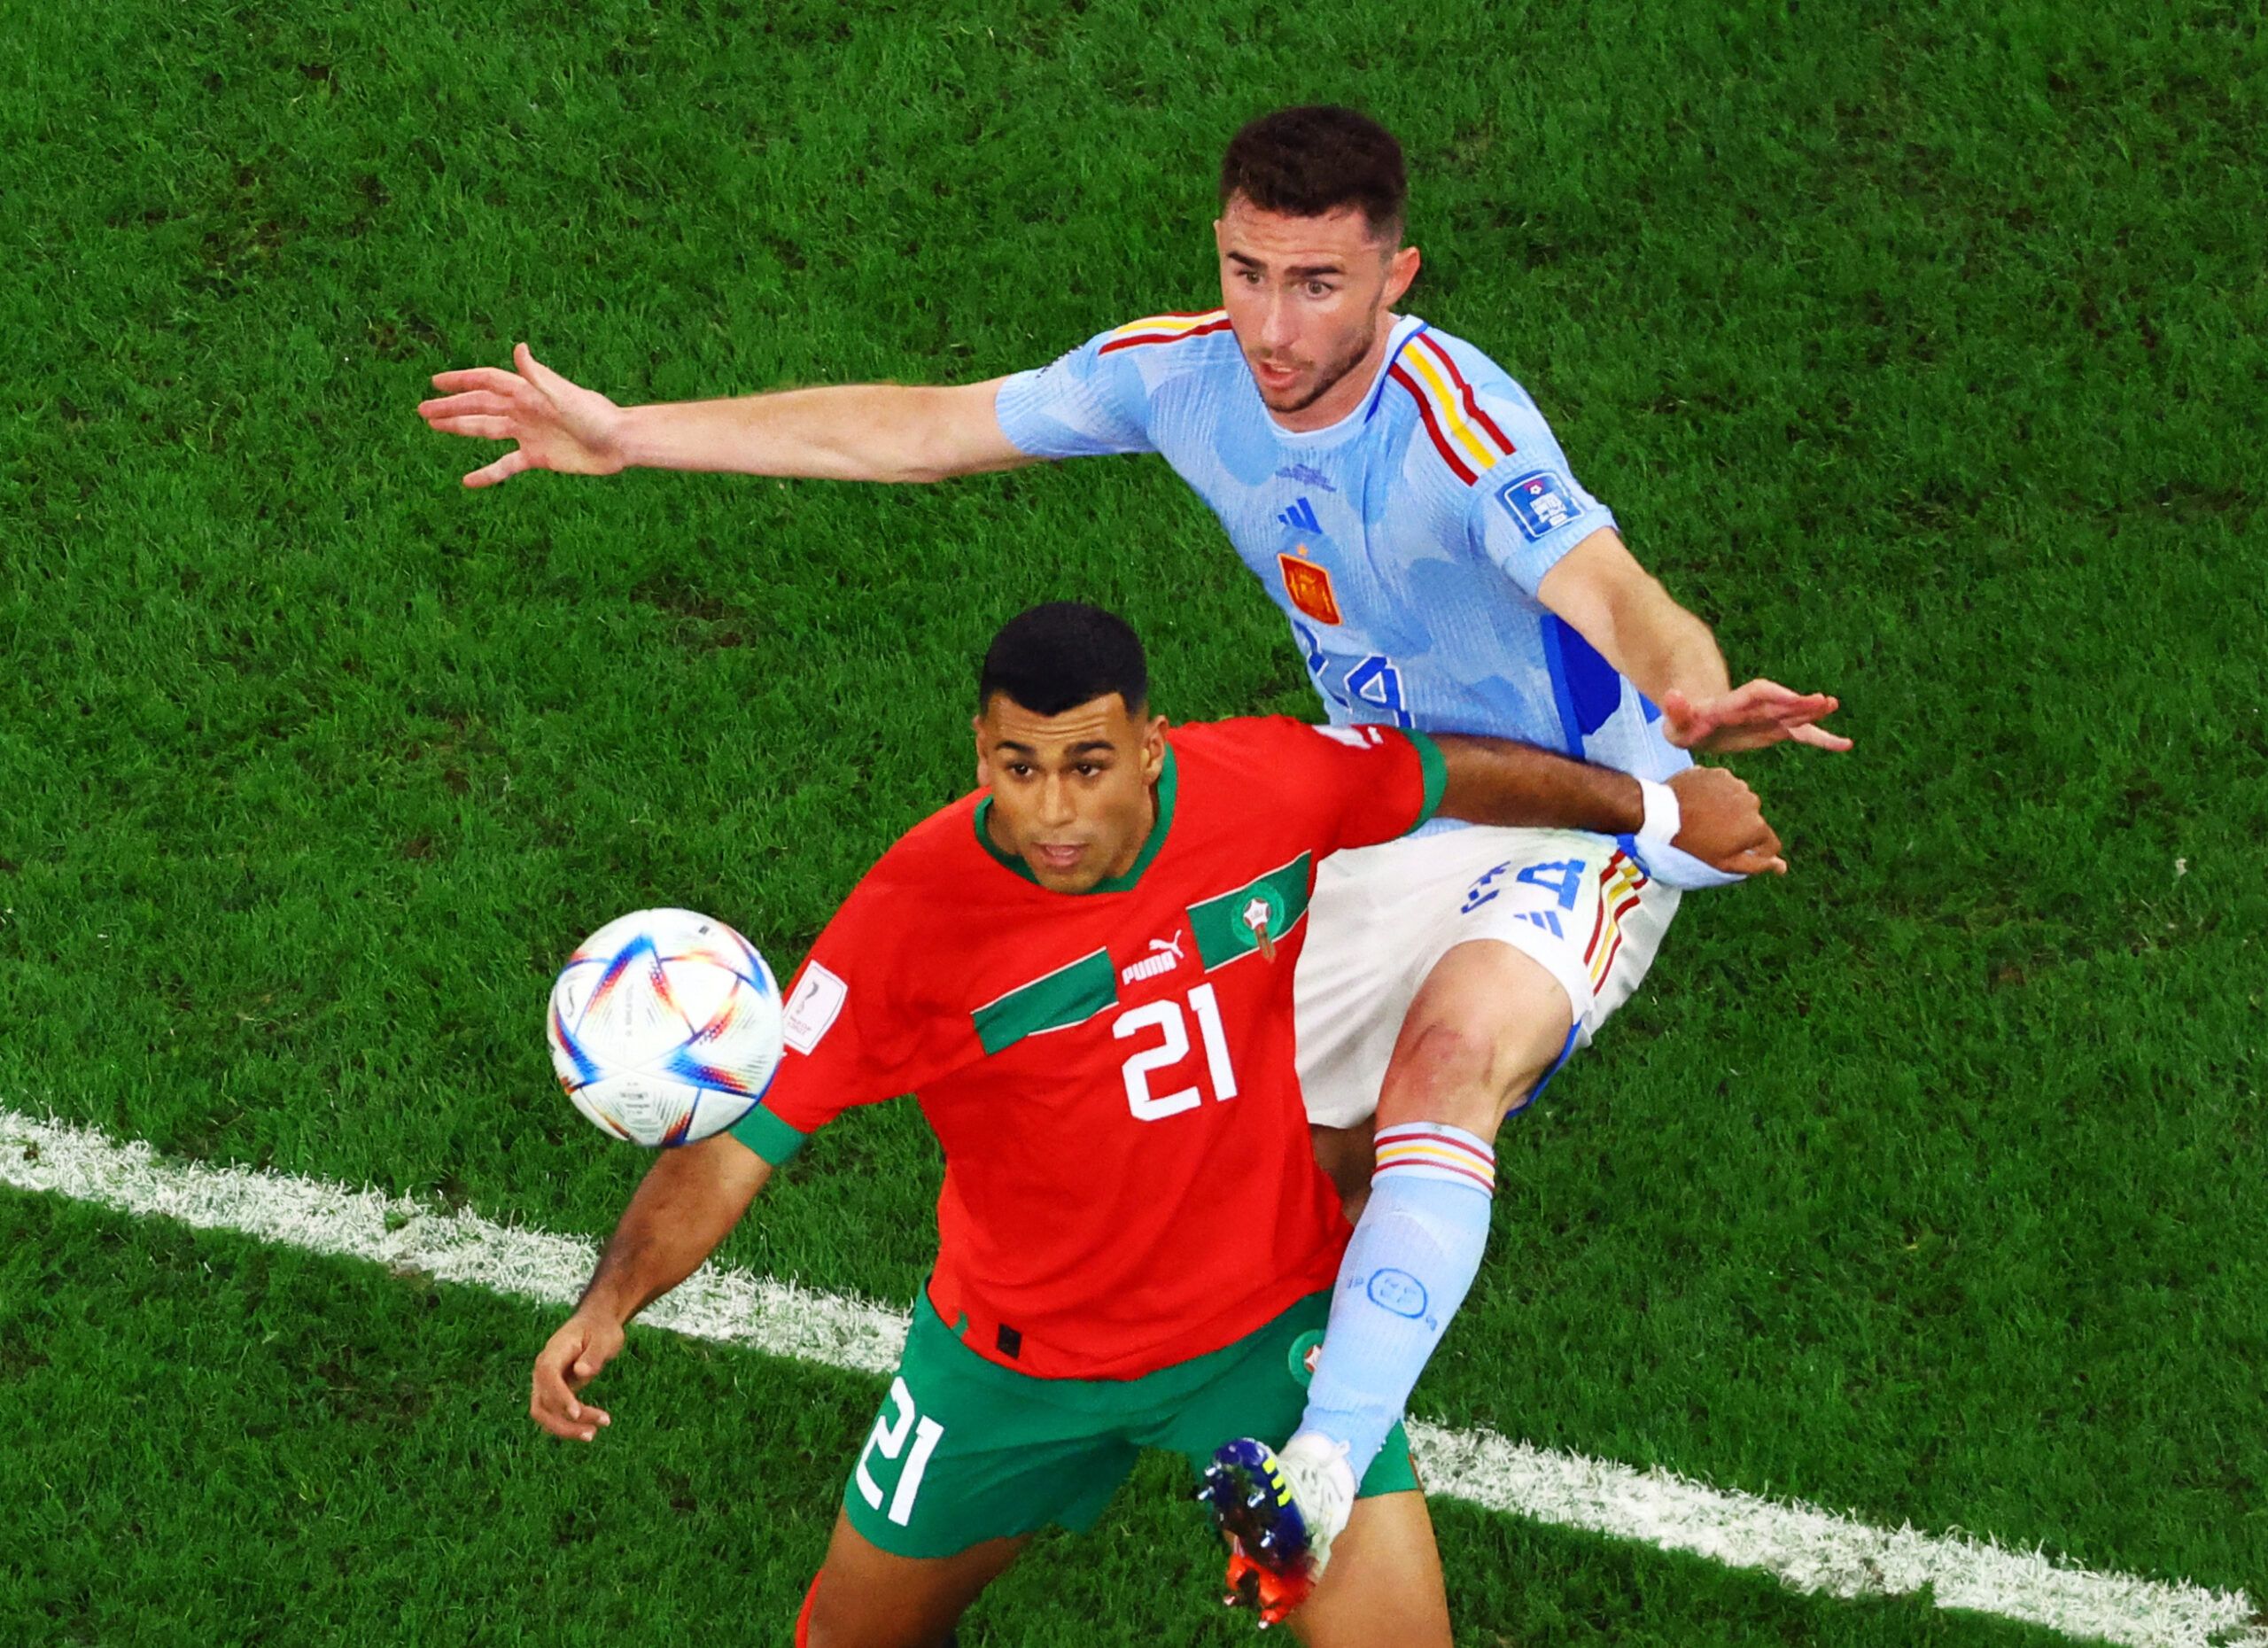 Soccer Football - FIFA World Cup Qatar 2022 - Round of 16 - Morocco v Spain - Education City Stadium, Al Rayyan, Qatar - December 6, 2022 Spain's Aymeric Laporte in action with Morocco's Walid Cheddira REUTERS/Fabrizio Bensch